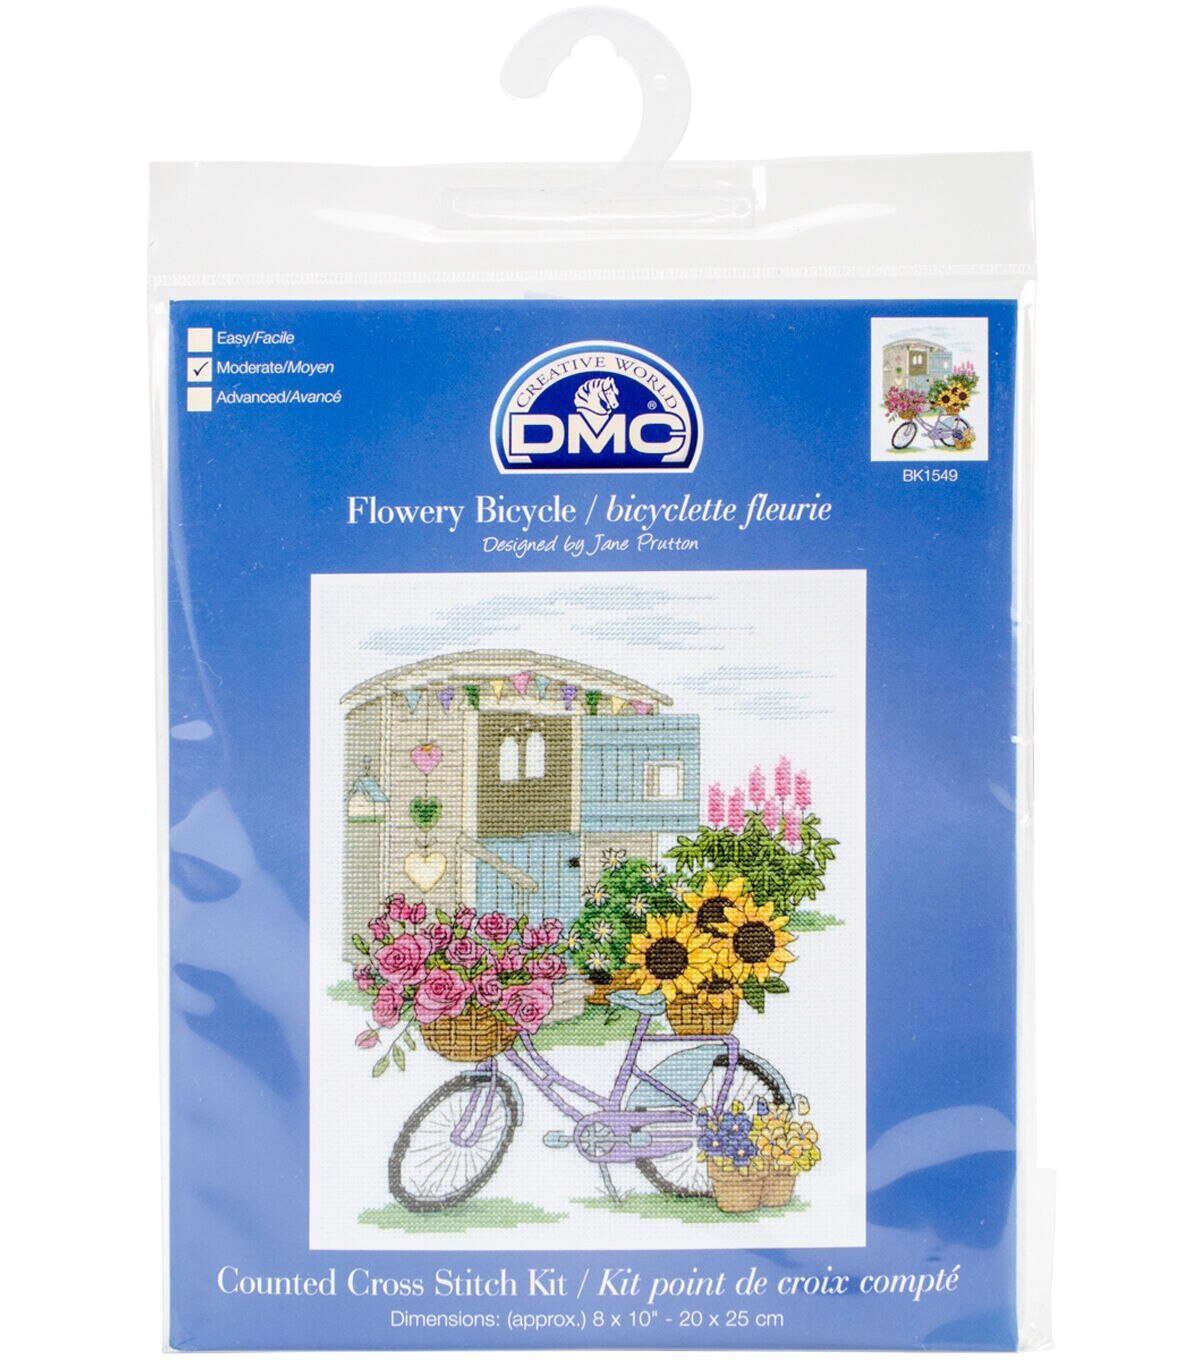 DMC Bicycle embroidery cross stitch kit small with wooden hoop and thread